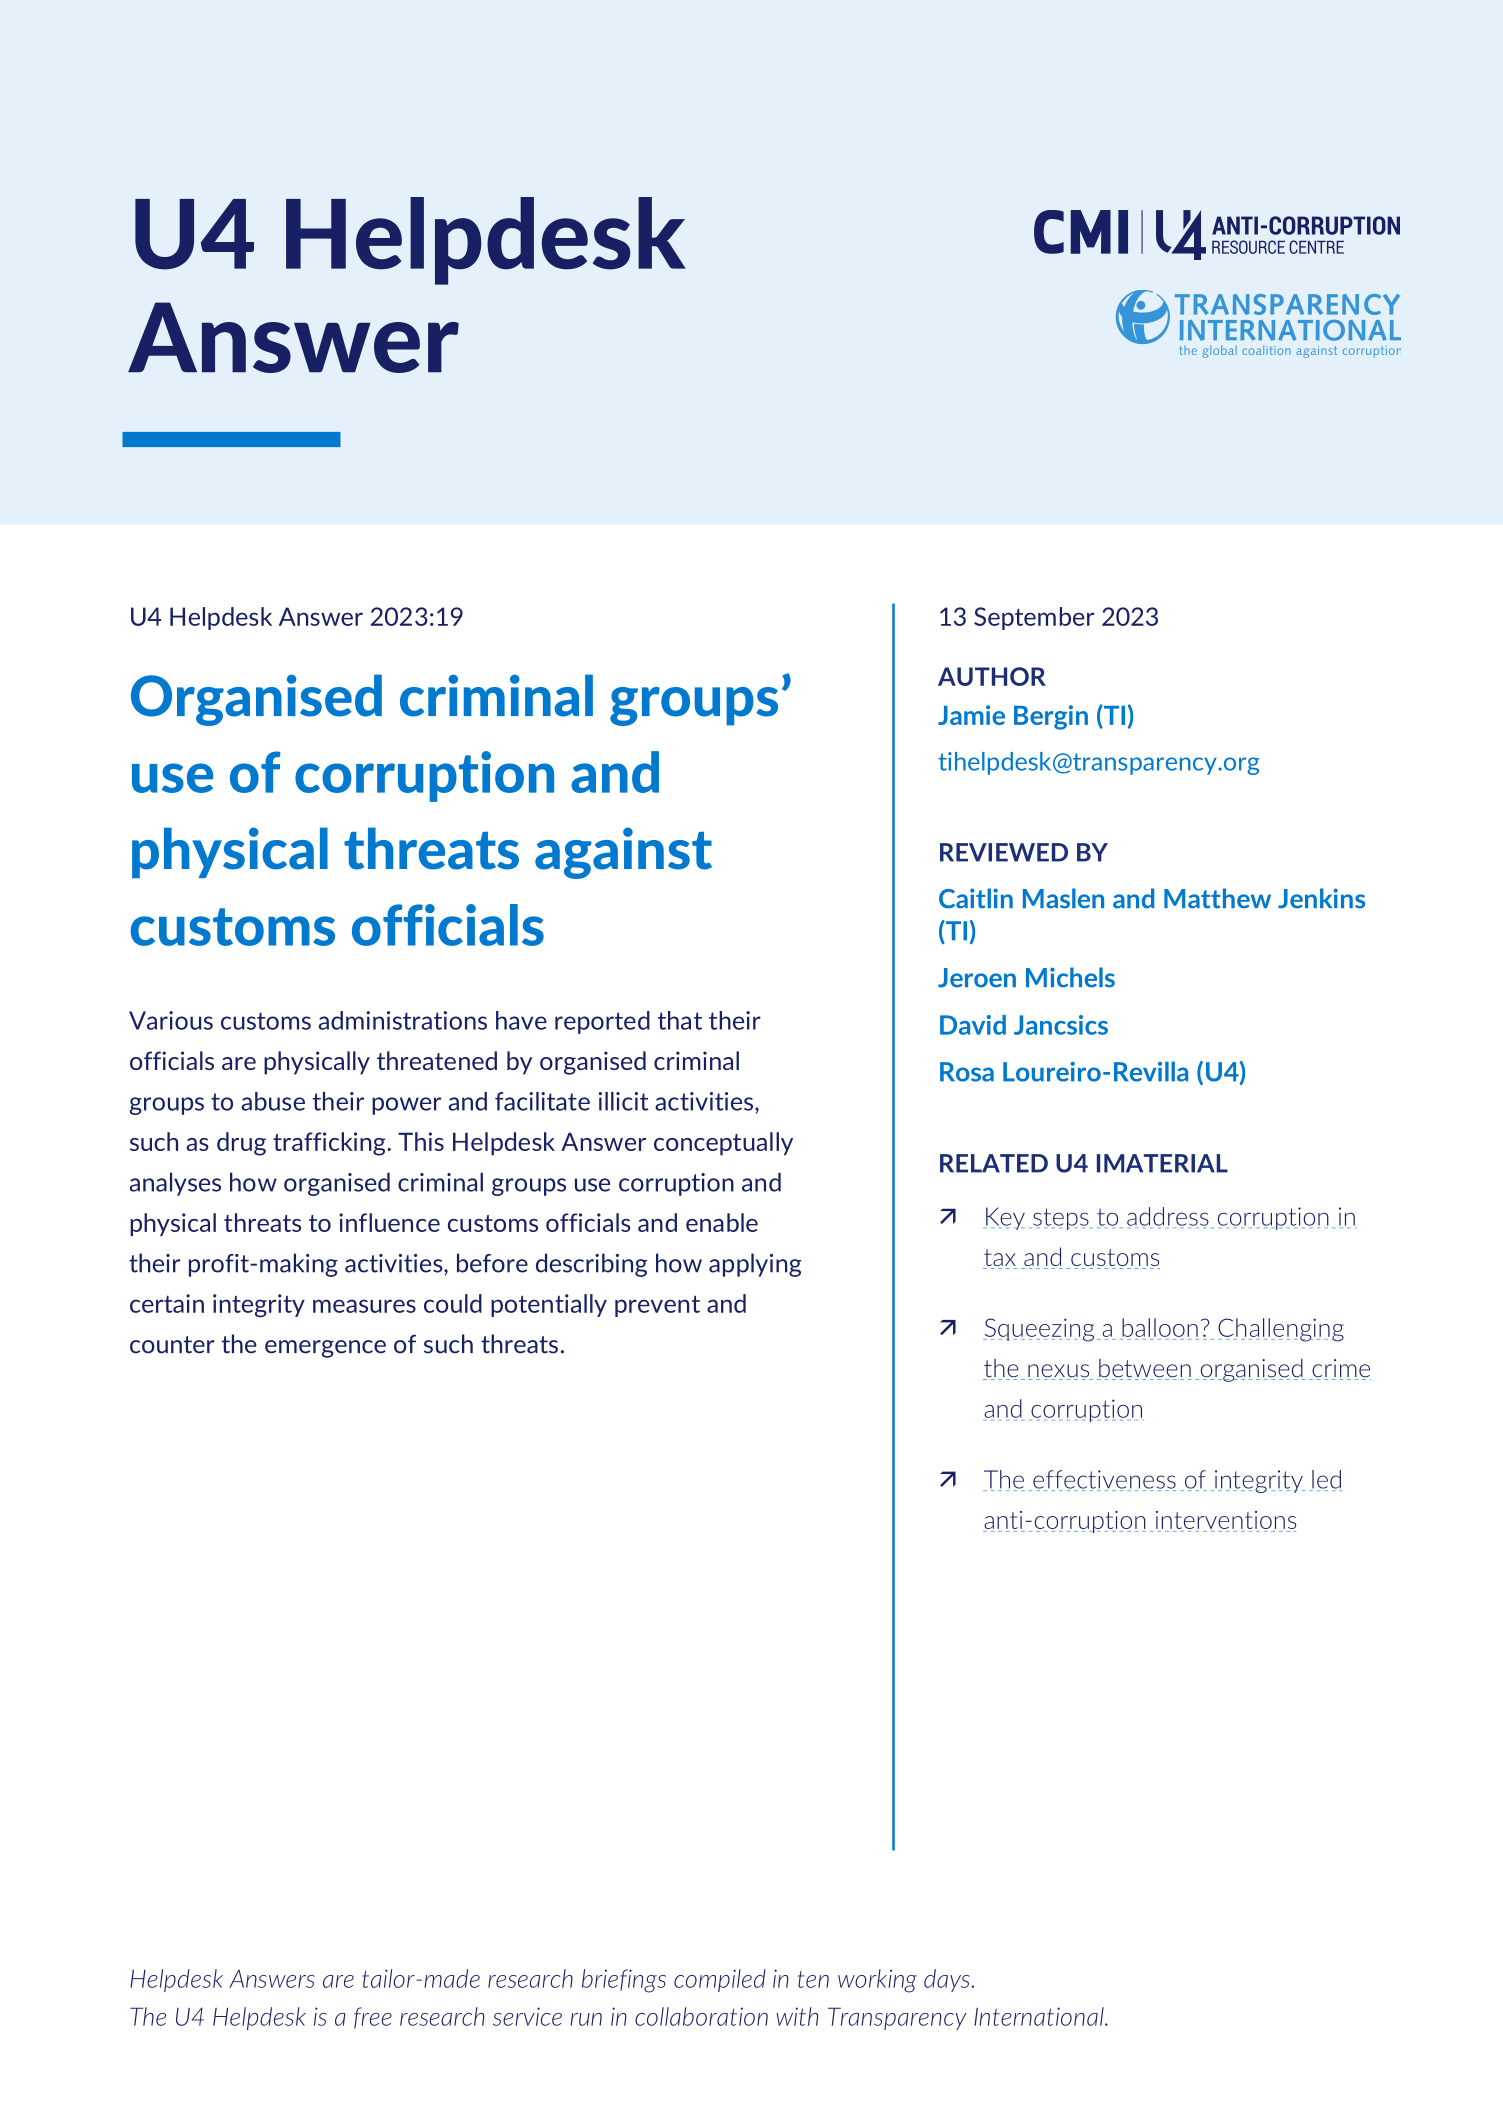 Organised criminal groups’ use of corruption and physical threats against customs officials